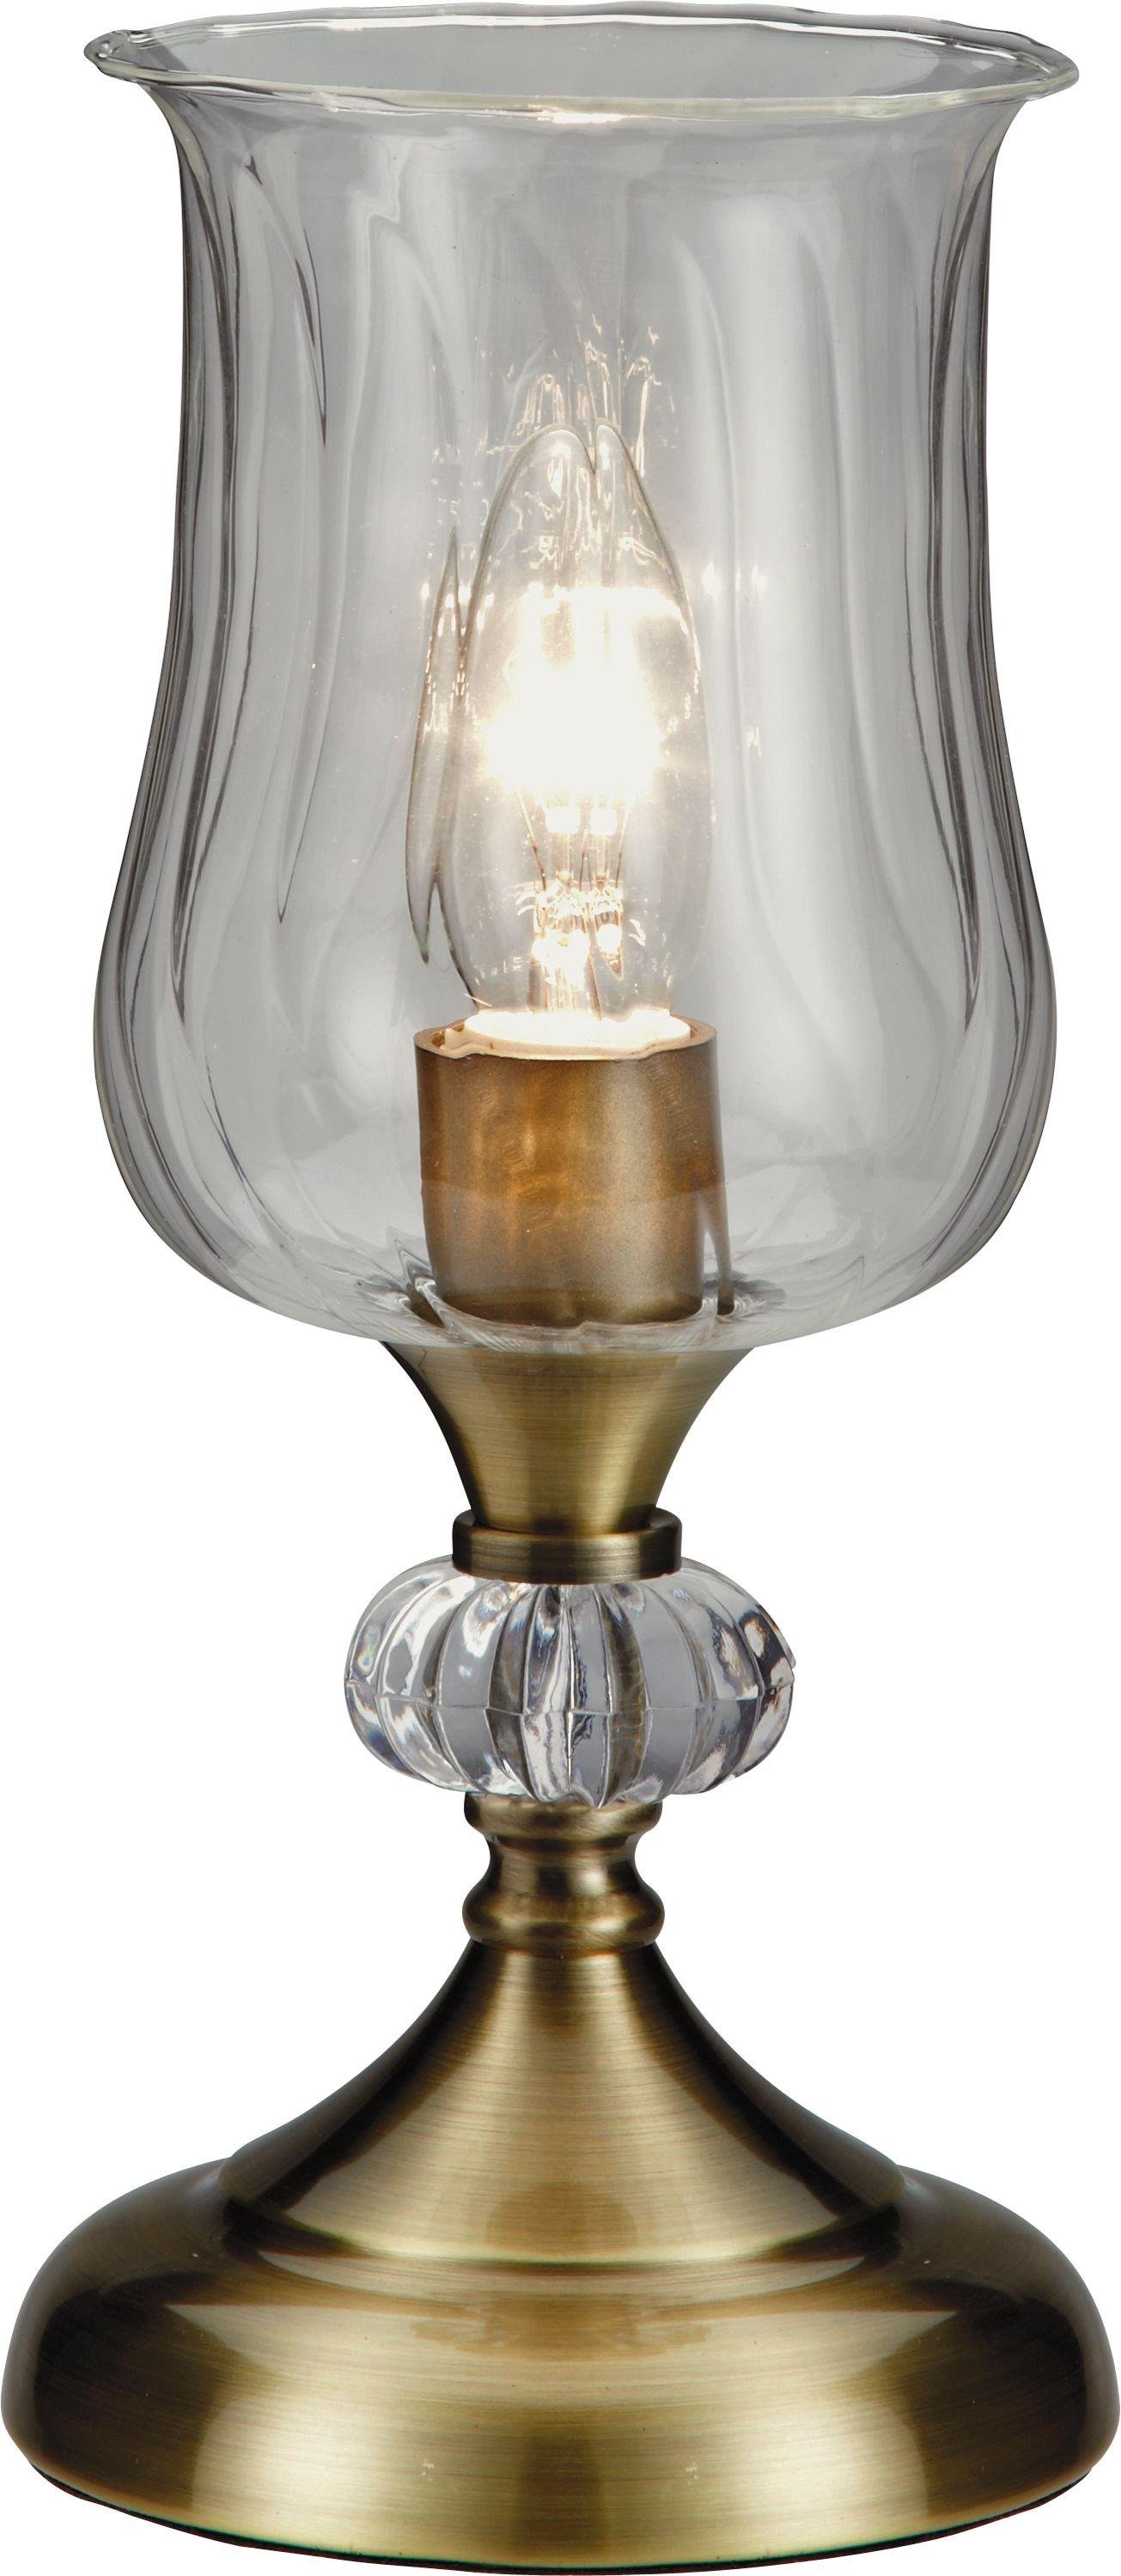 Argos Home Hurricane Touch Table Lamp - Antique Brass